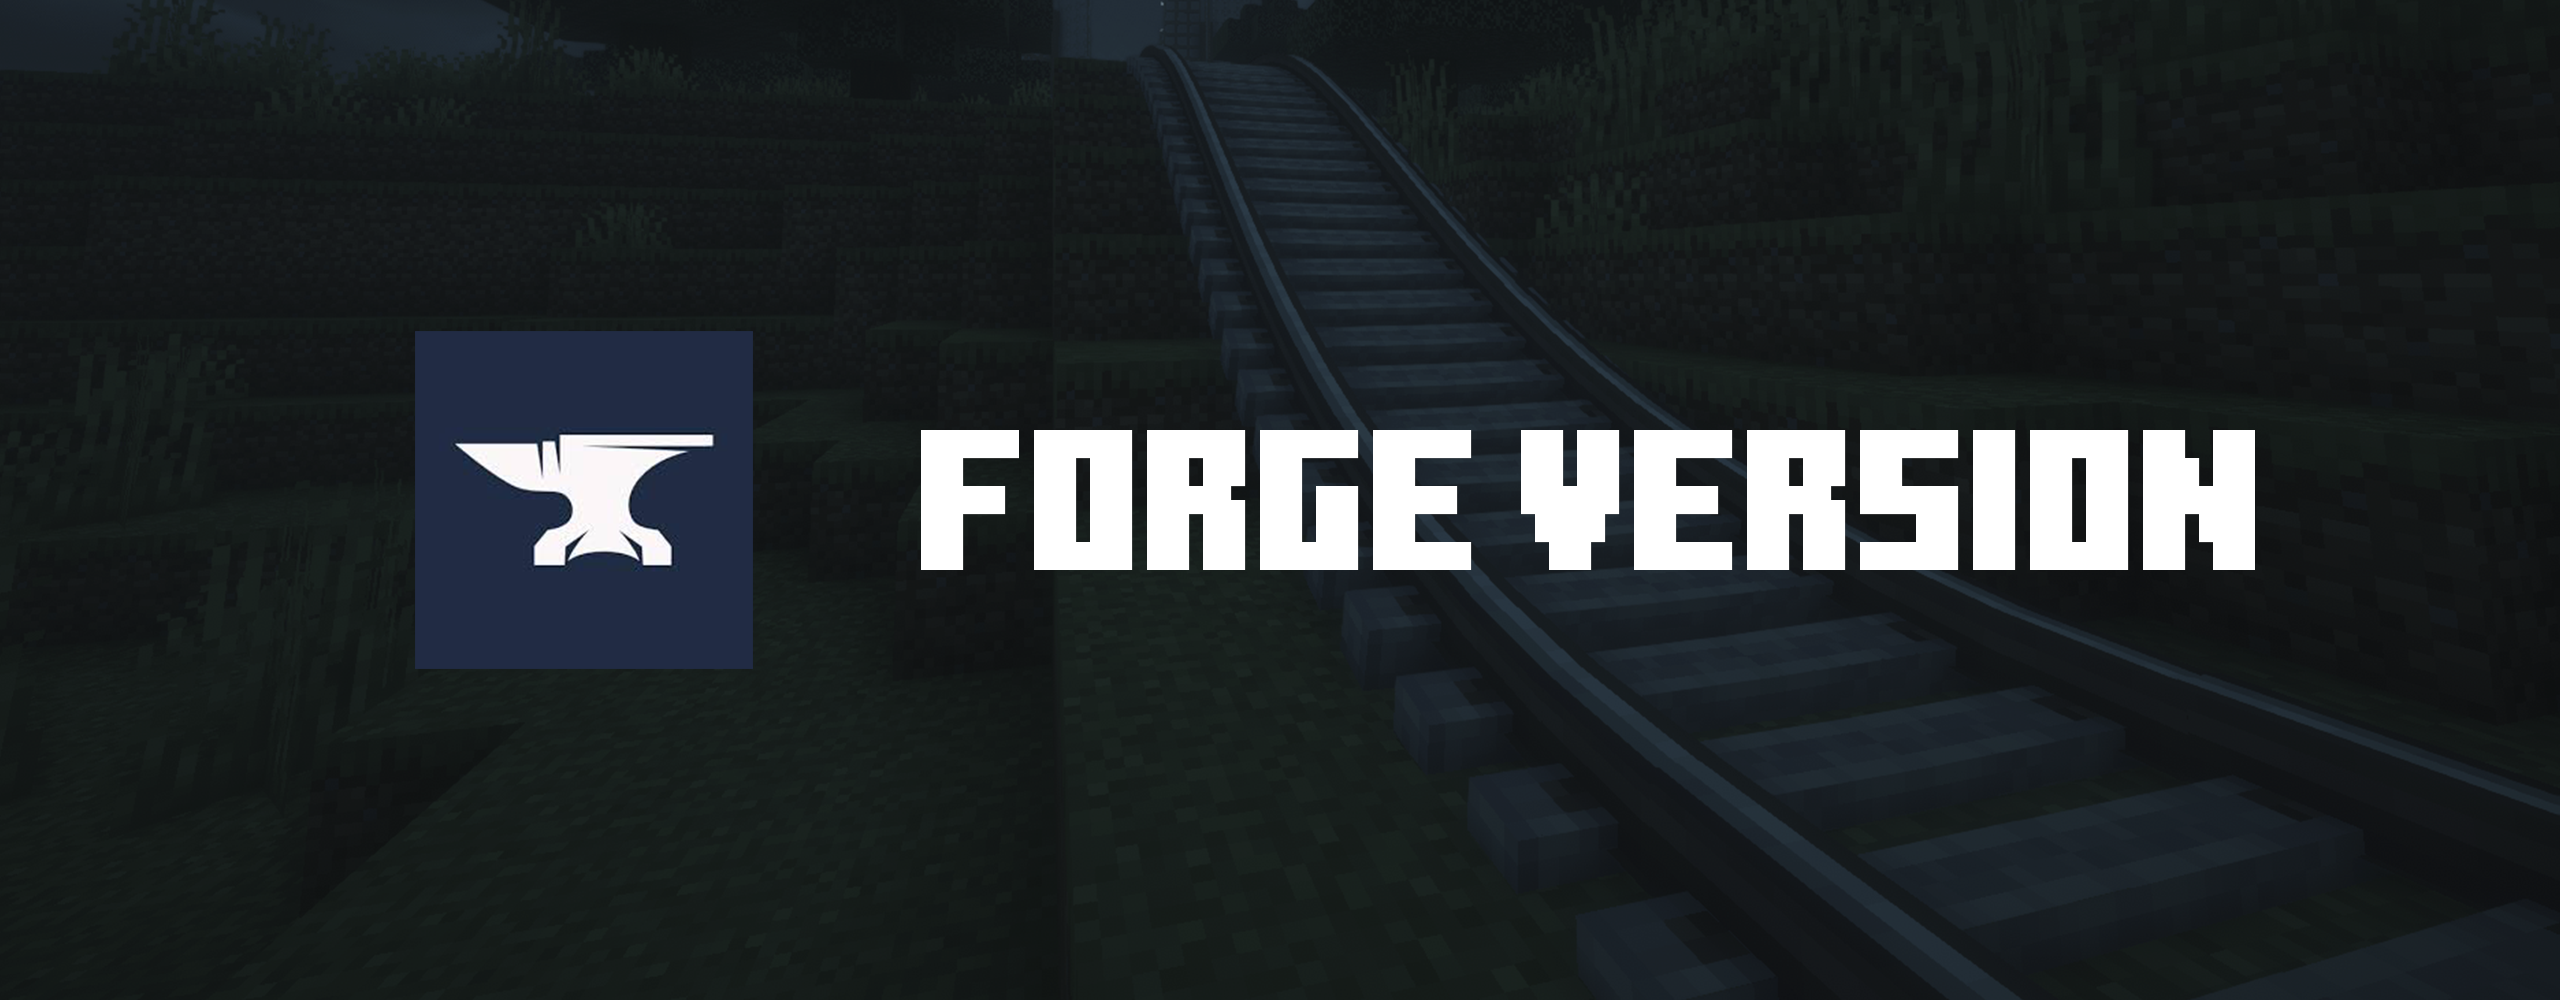 Forge Version